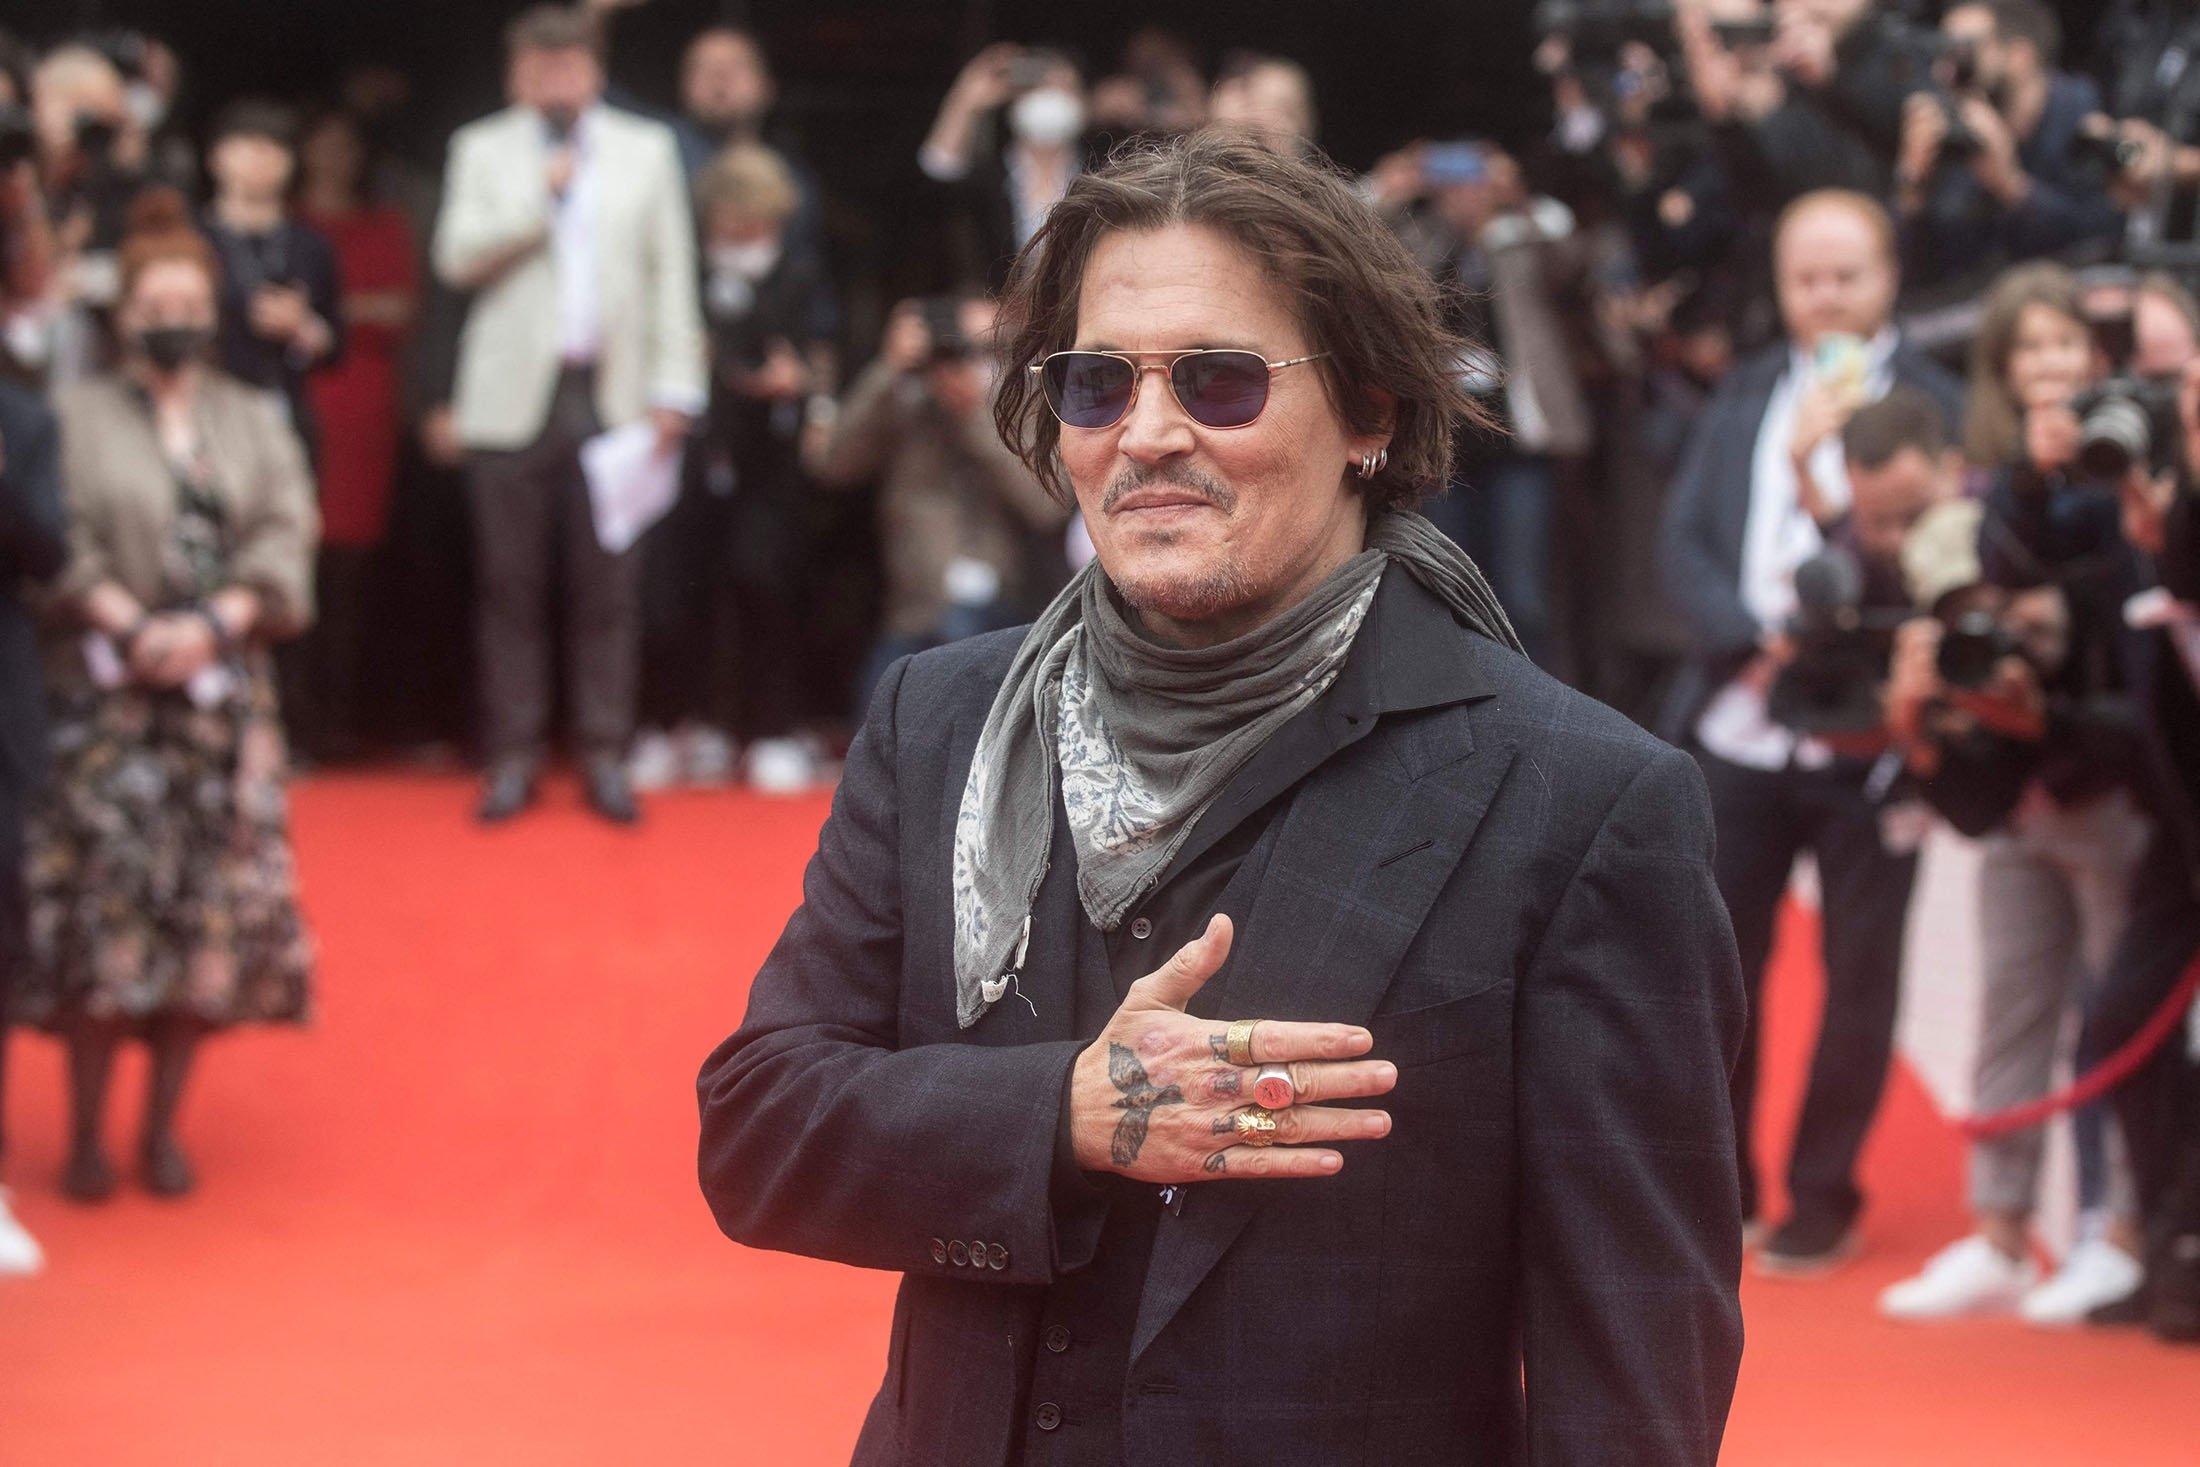 American actor and producer Johnny Depp greets his fans on the red carpet during the 55th edition of the Karlovy Vary International Film Festival (KVIFF) in Karlovy Vary, Czech Republic, Aug. 27, 2021. (AFP Photo)